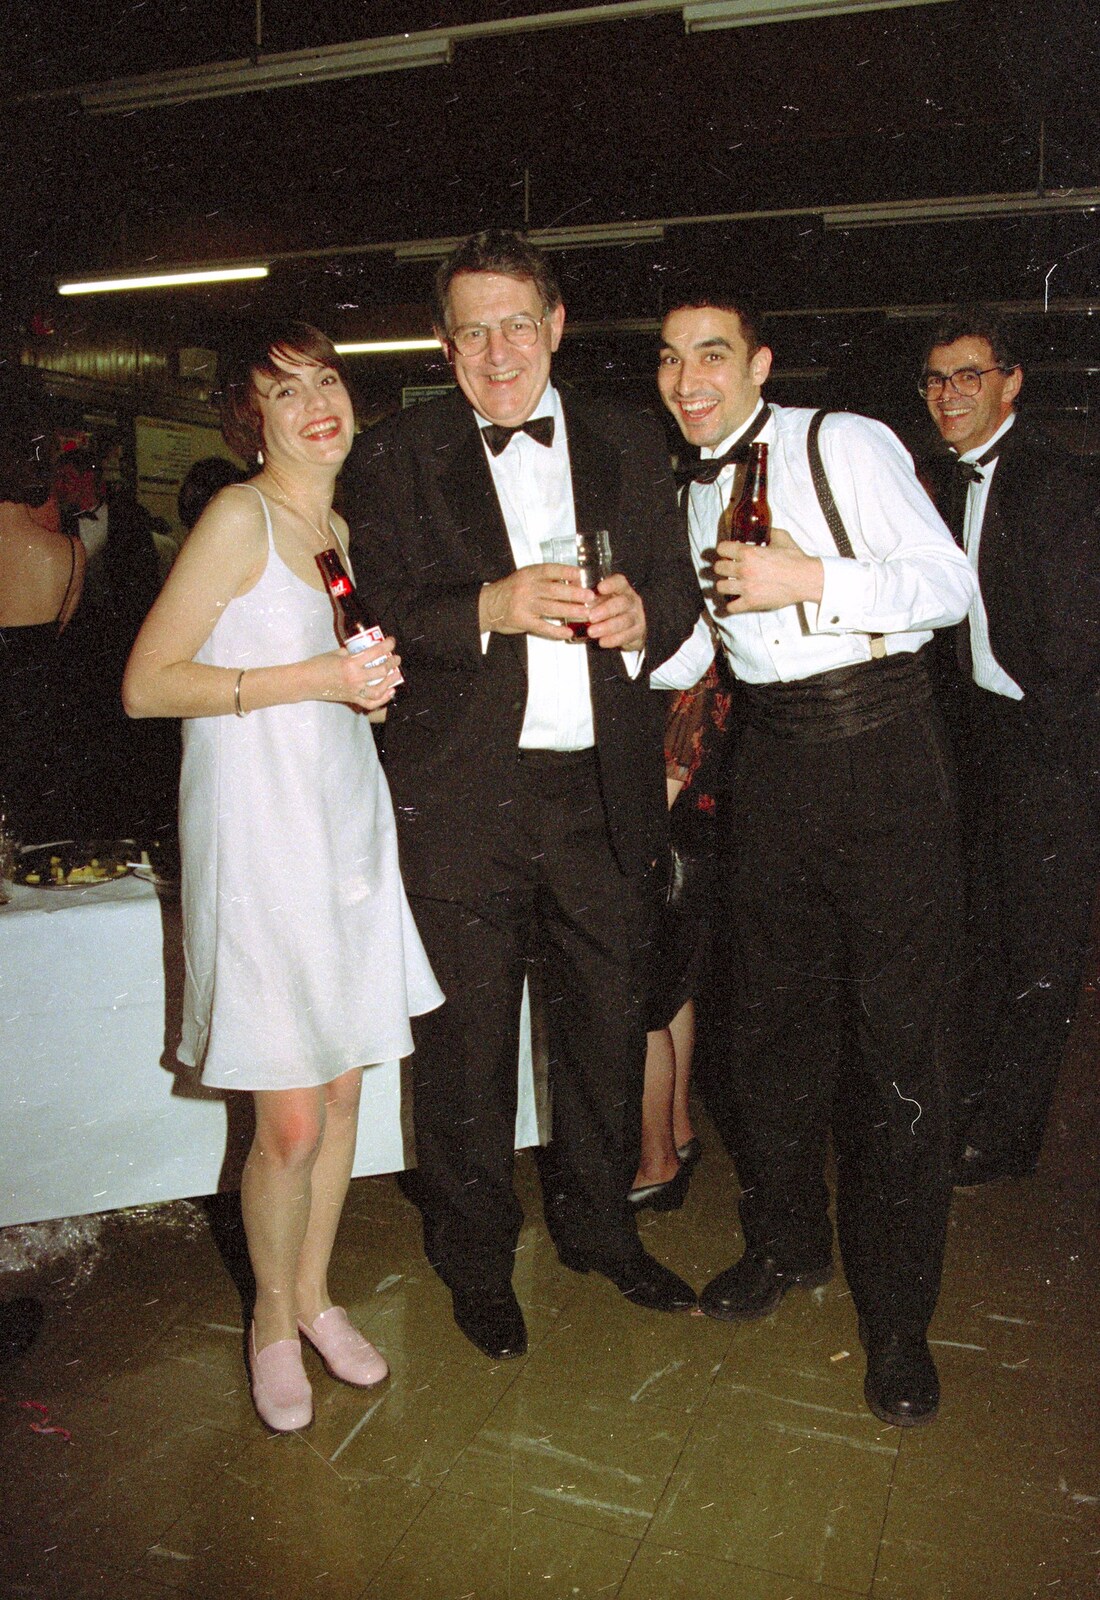 The college principal and Orhan from CISU at the Suffolk College May Ball, Ipswich, Suffolk - 11th May 1997